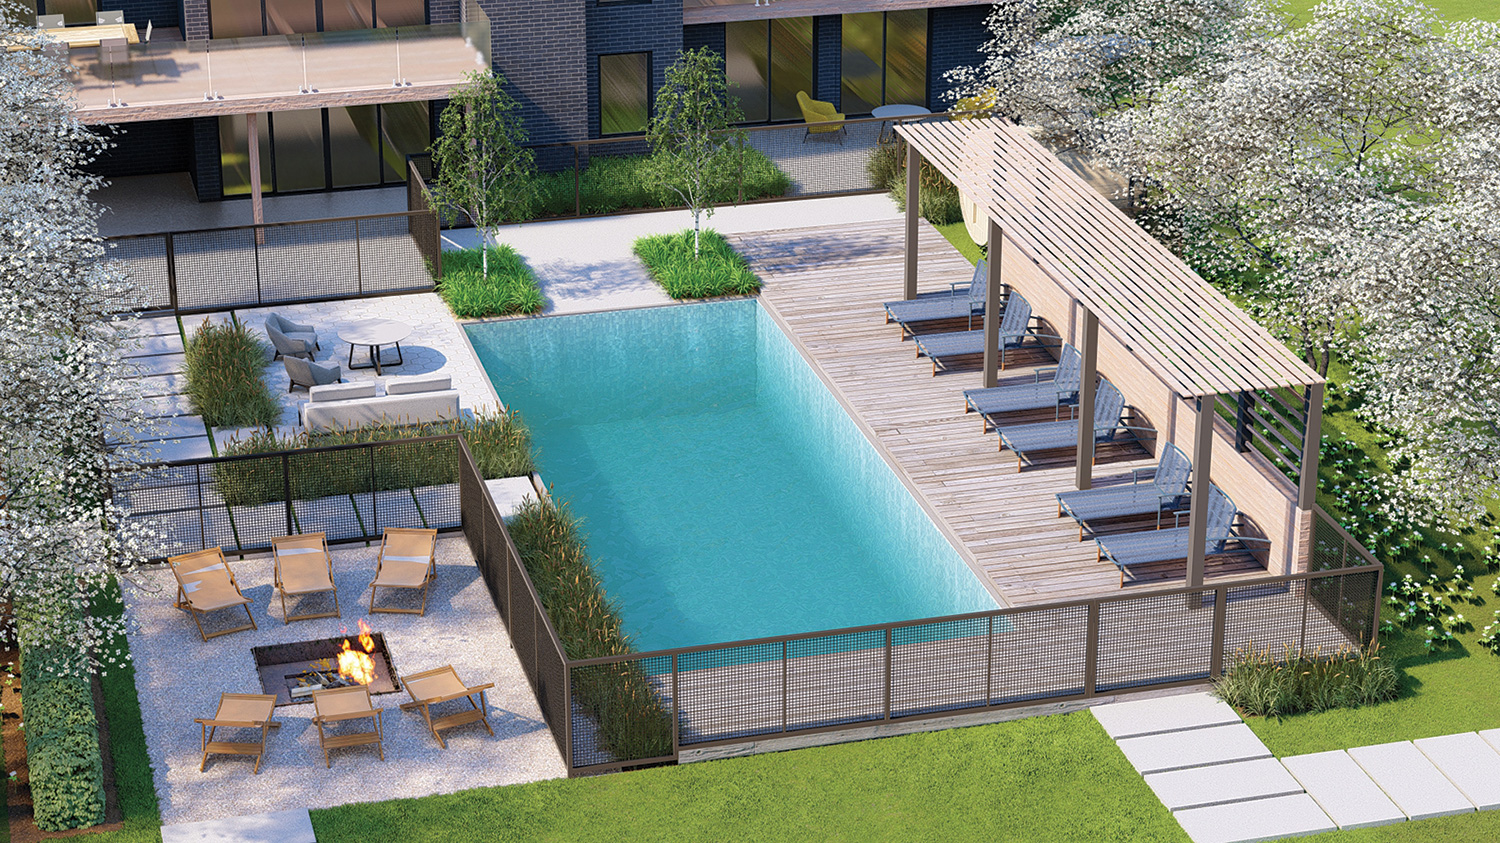 The clients requested a swimming pool, spa, sauna, shade solution, fire pit and lounge area. The renderings show different enclosures that meet municipal requirements, including a frameless glass railing